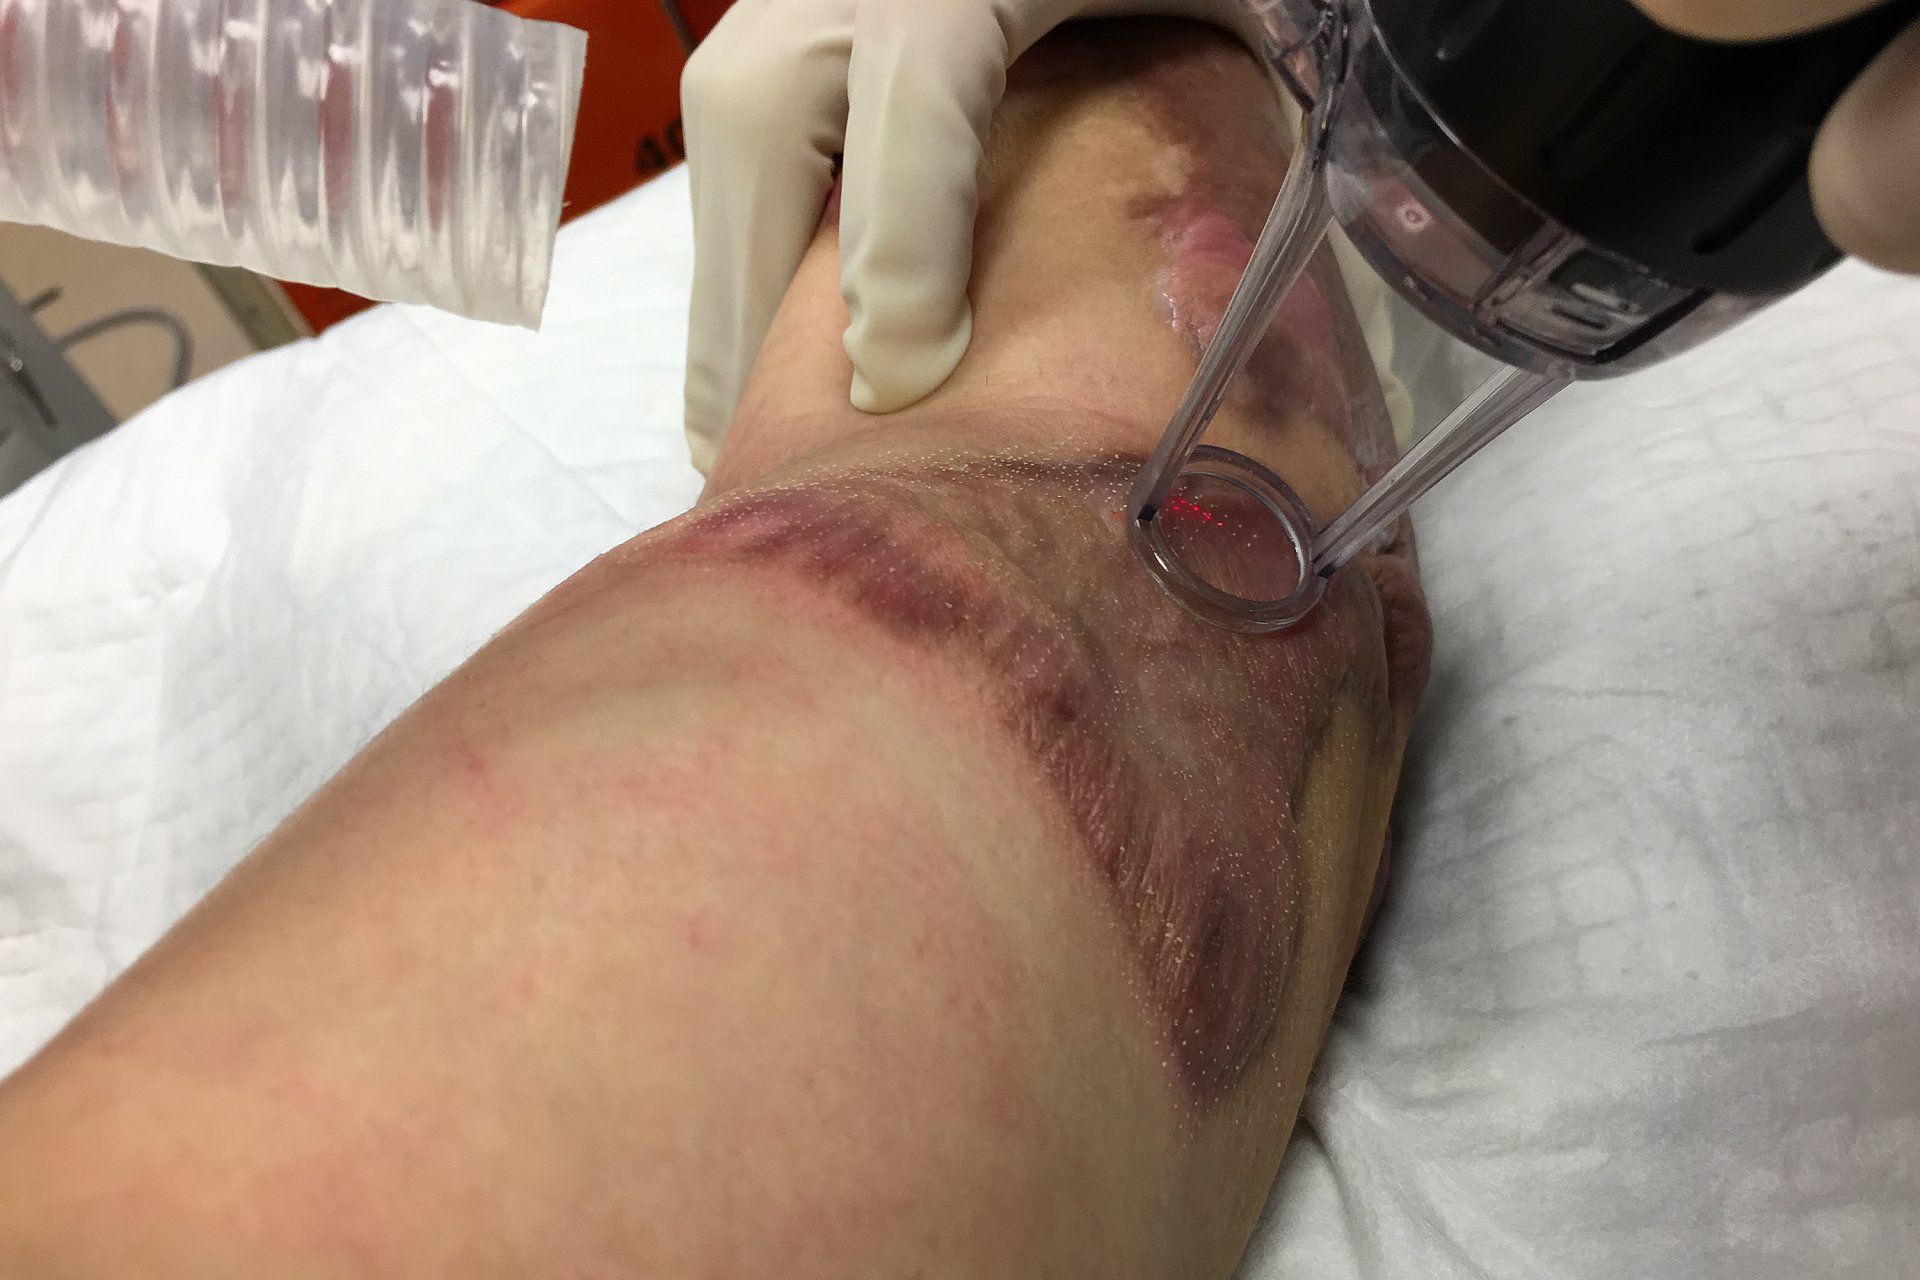 Image of Laser Treatment of Contracture Scar on Man's Arm